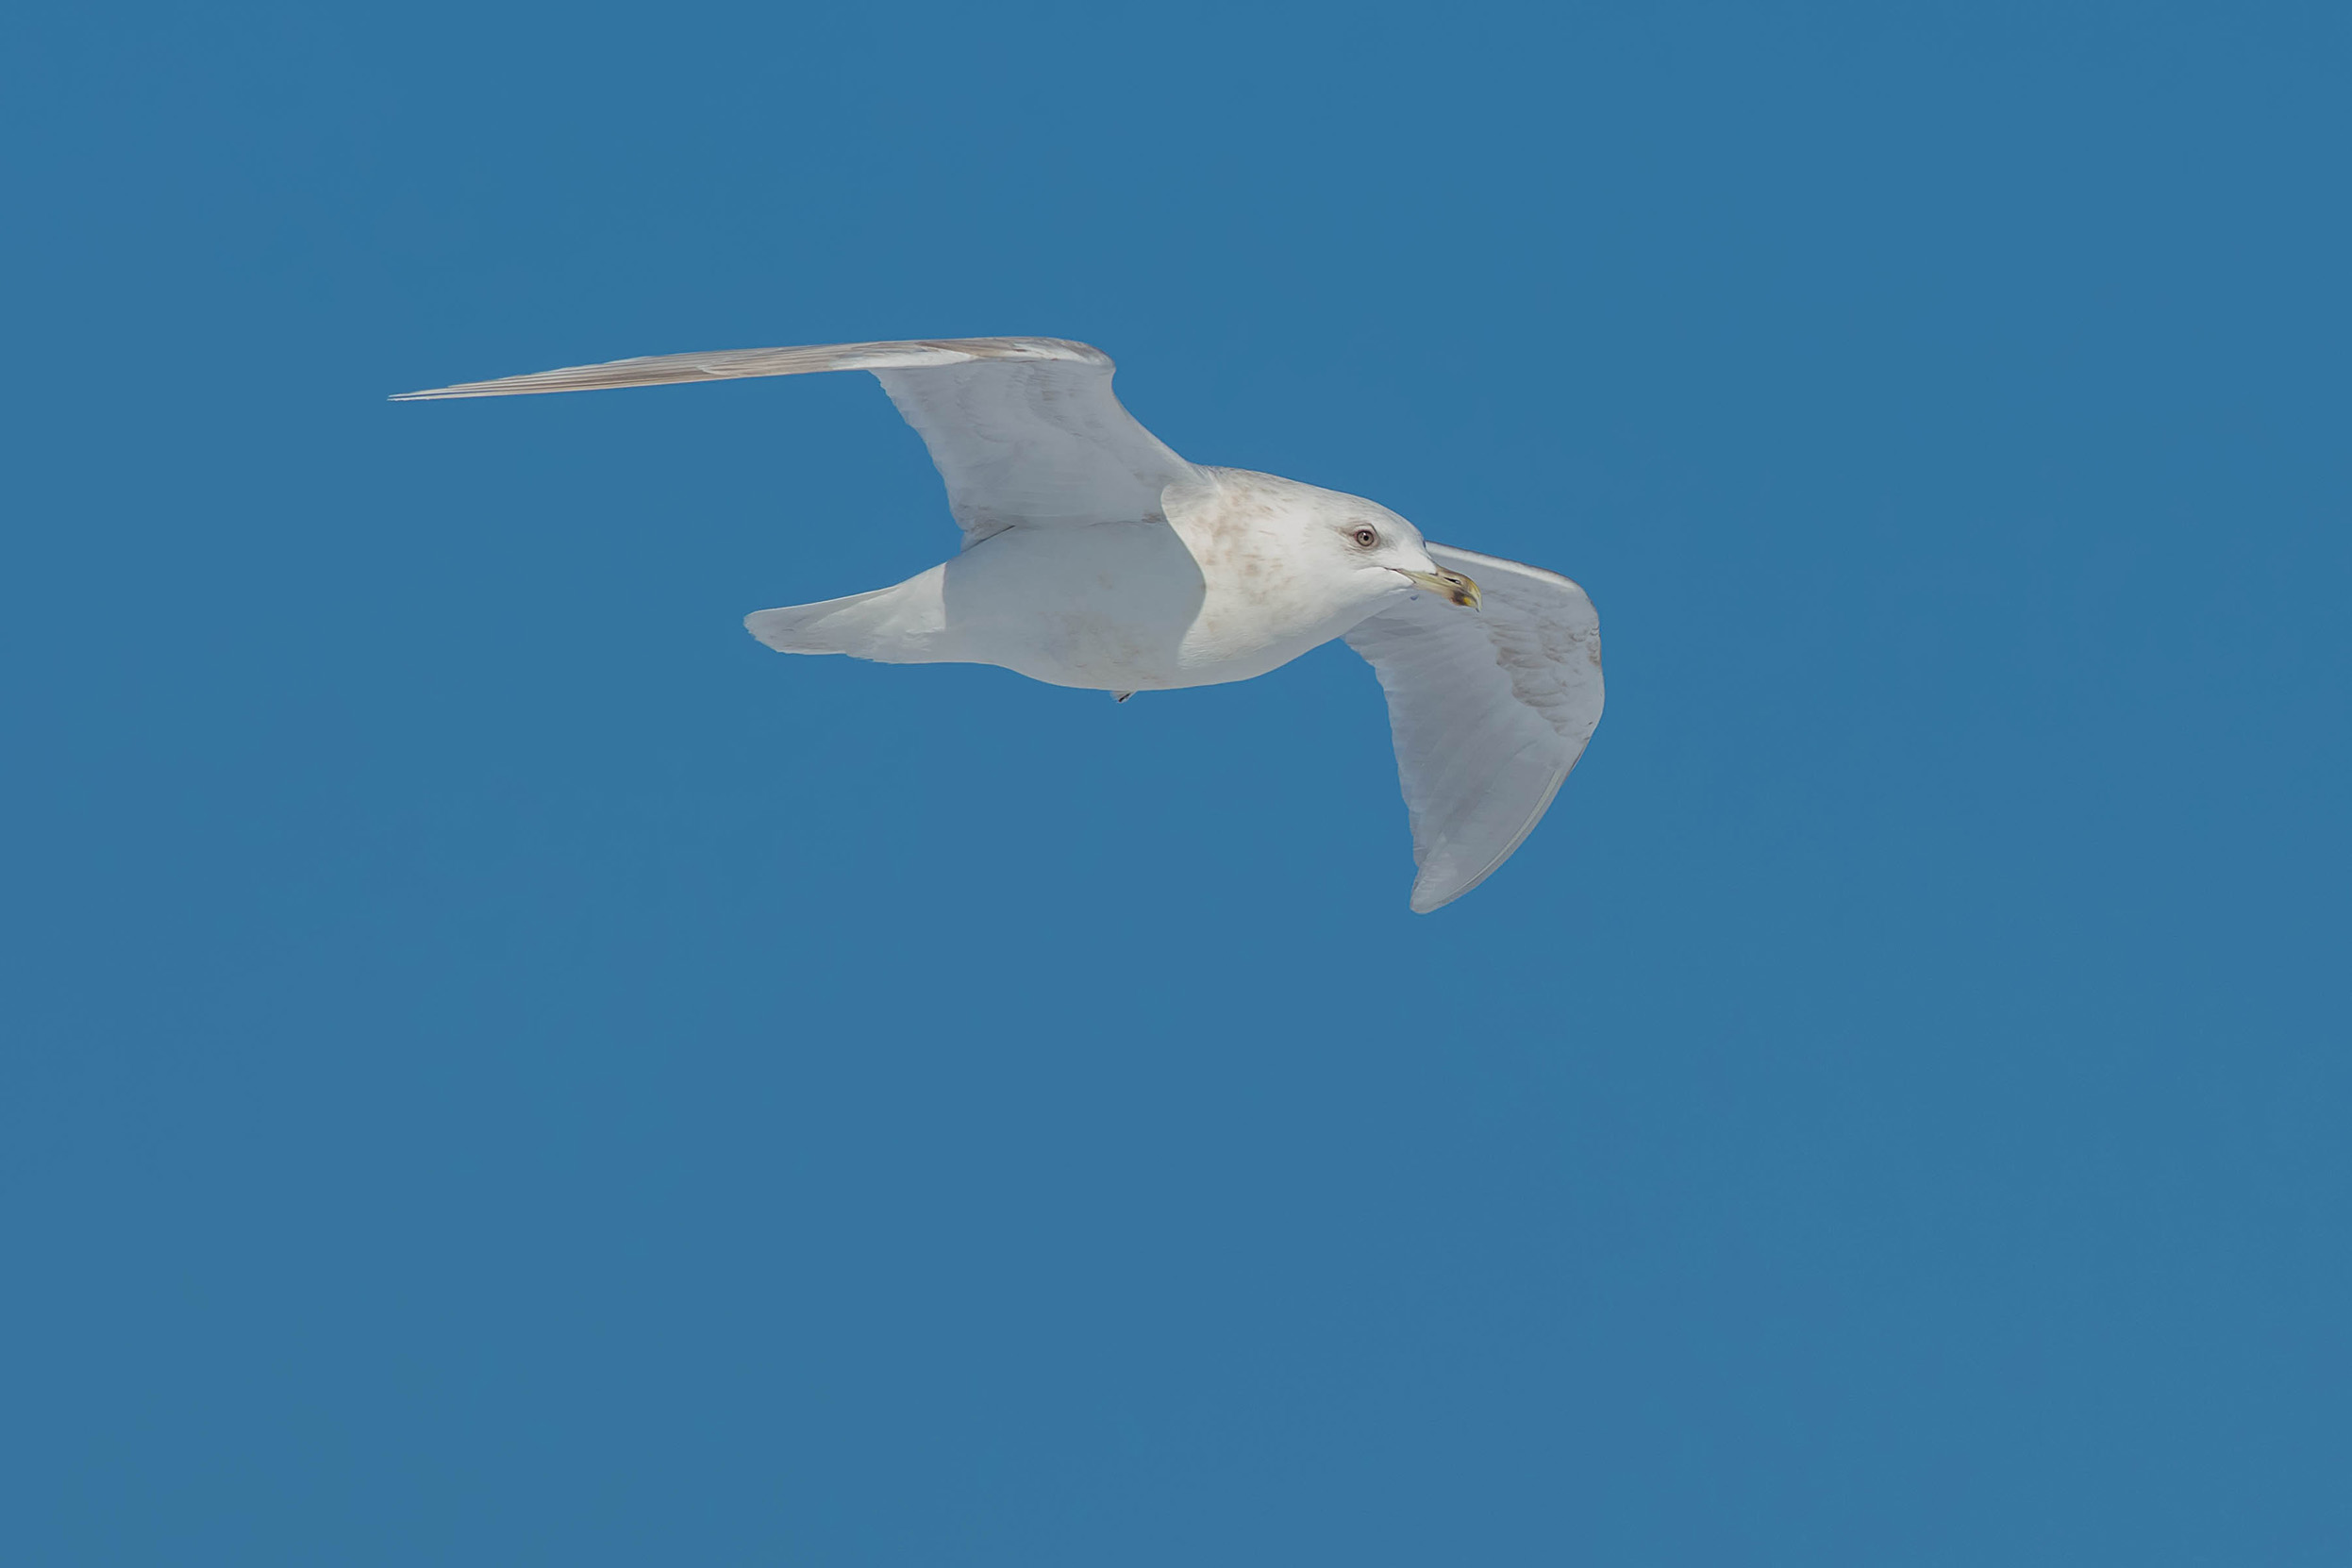 A lone Iceland Gull soaring across a clear blue sky.